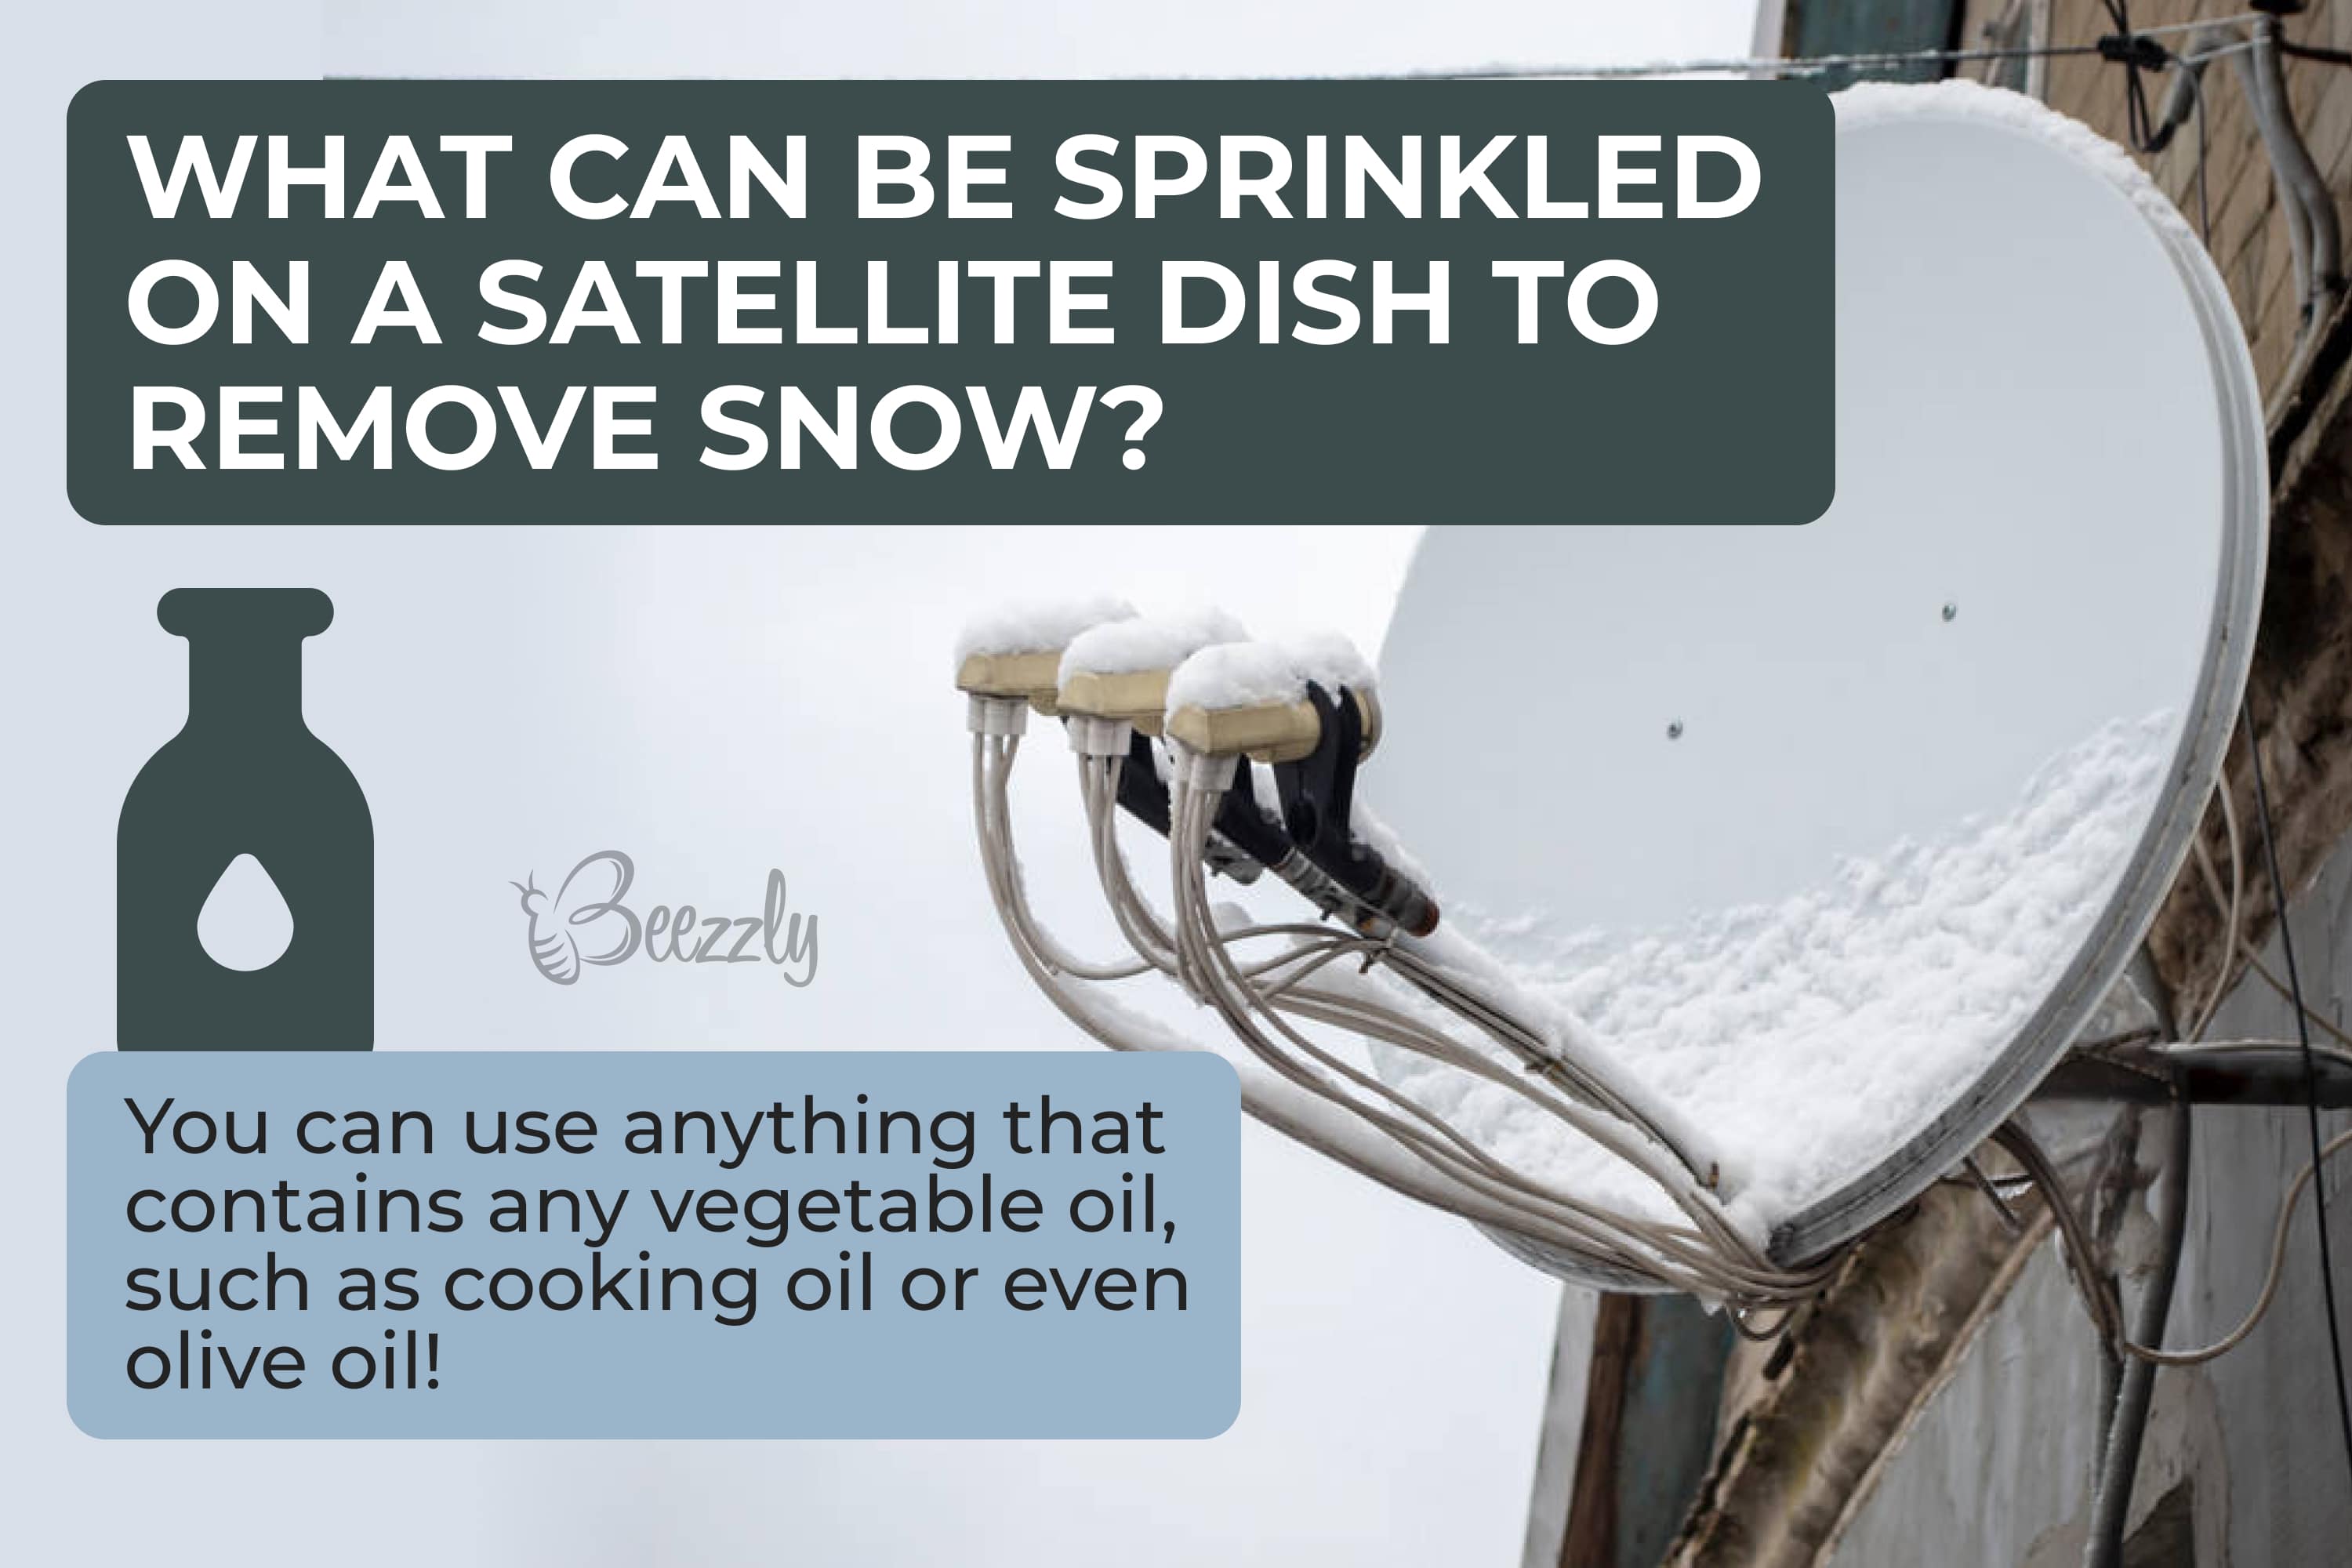 What can be sprinkled on a satellite dish to remove snow